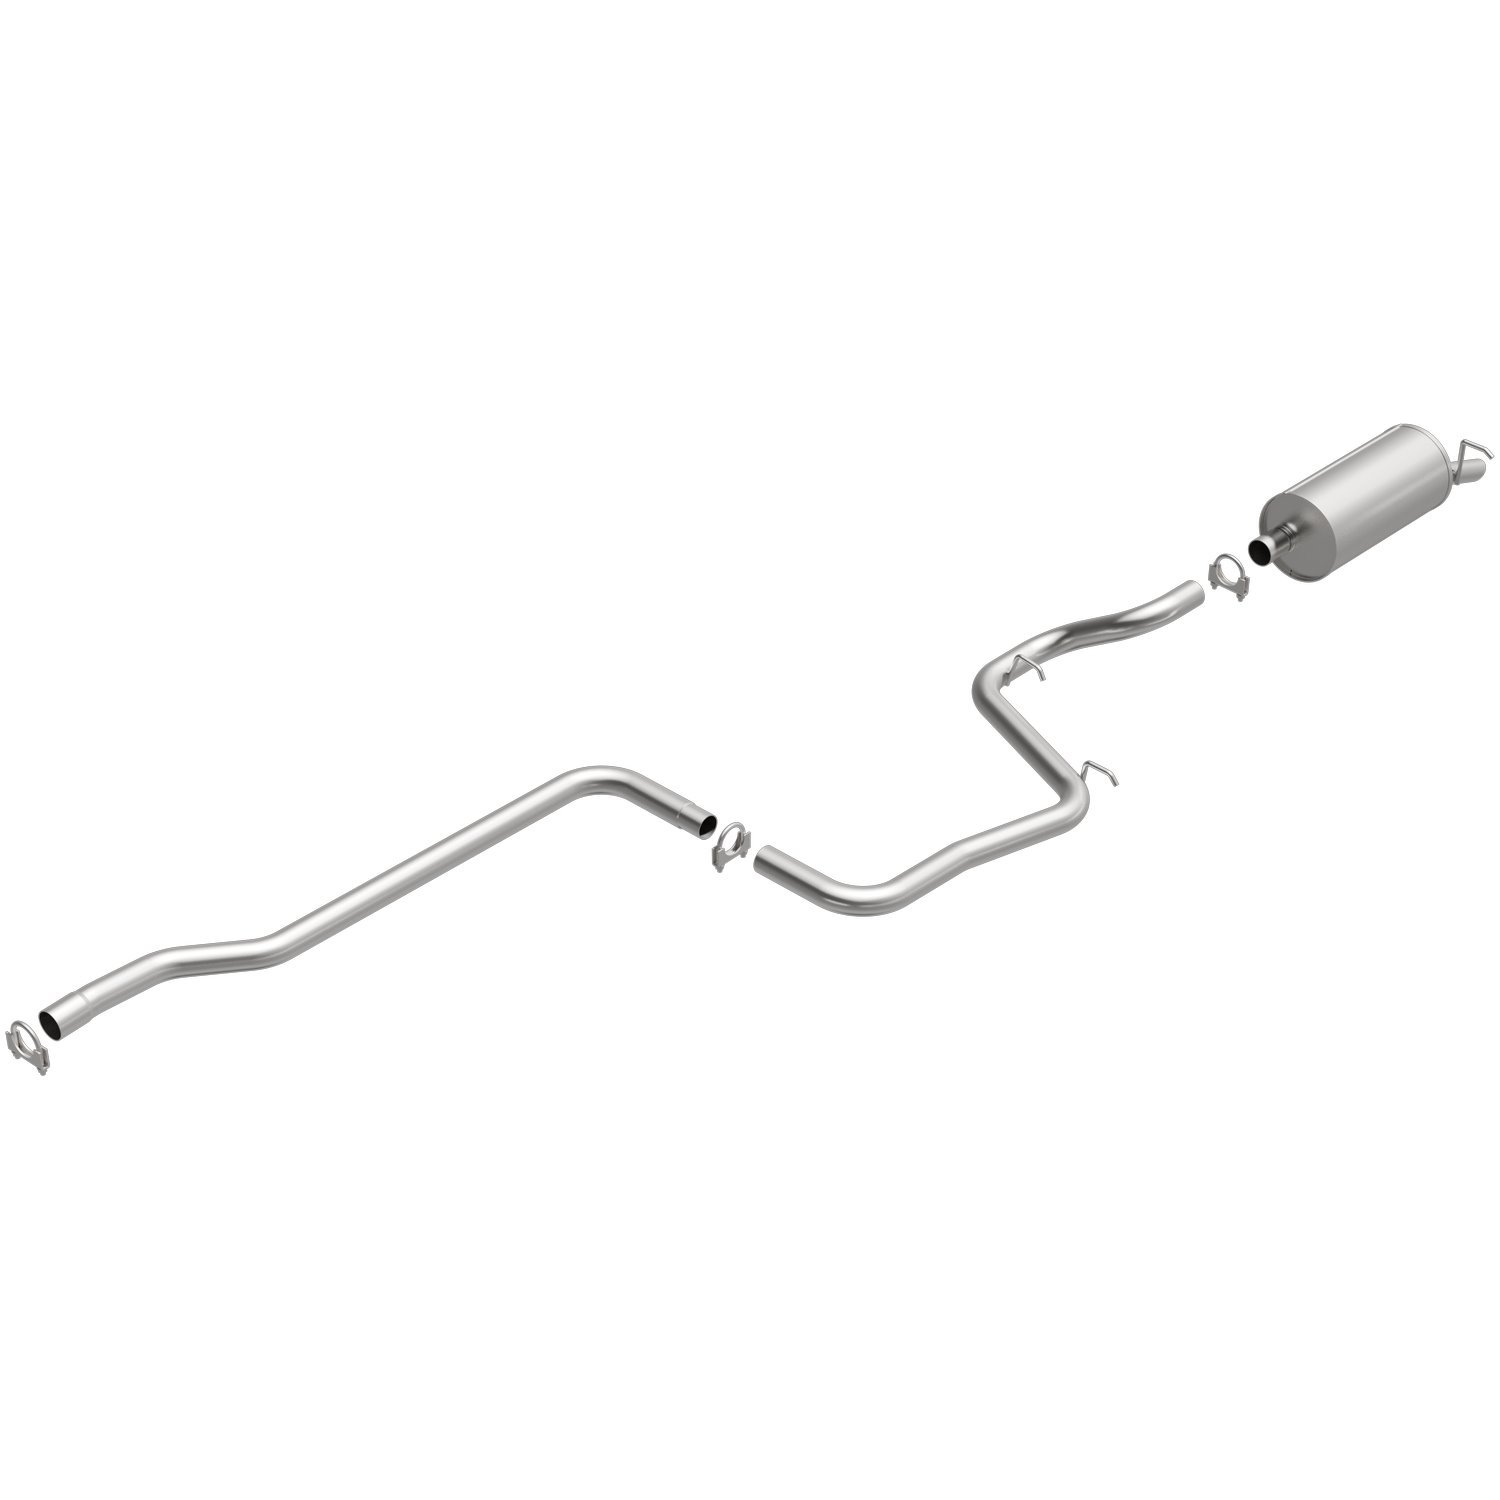 Direct-Fit Exhaust Kit, 1984-1994 Ford Tempo, Mercury Topaz